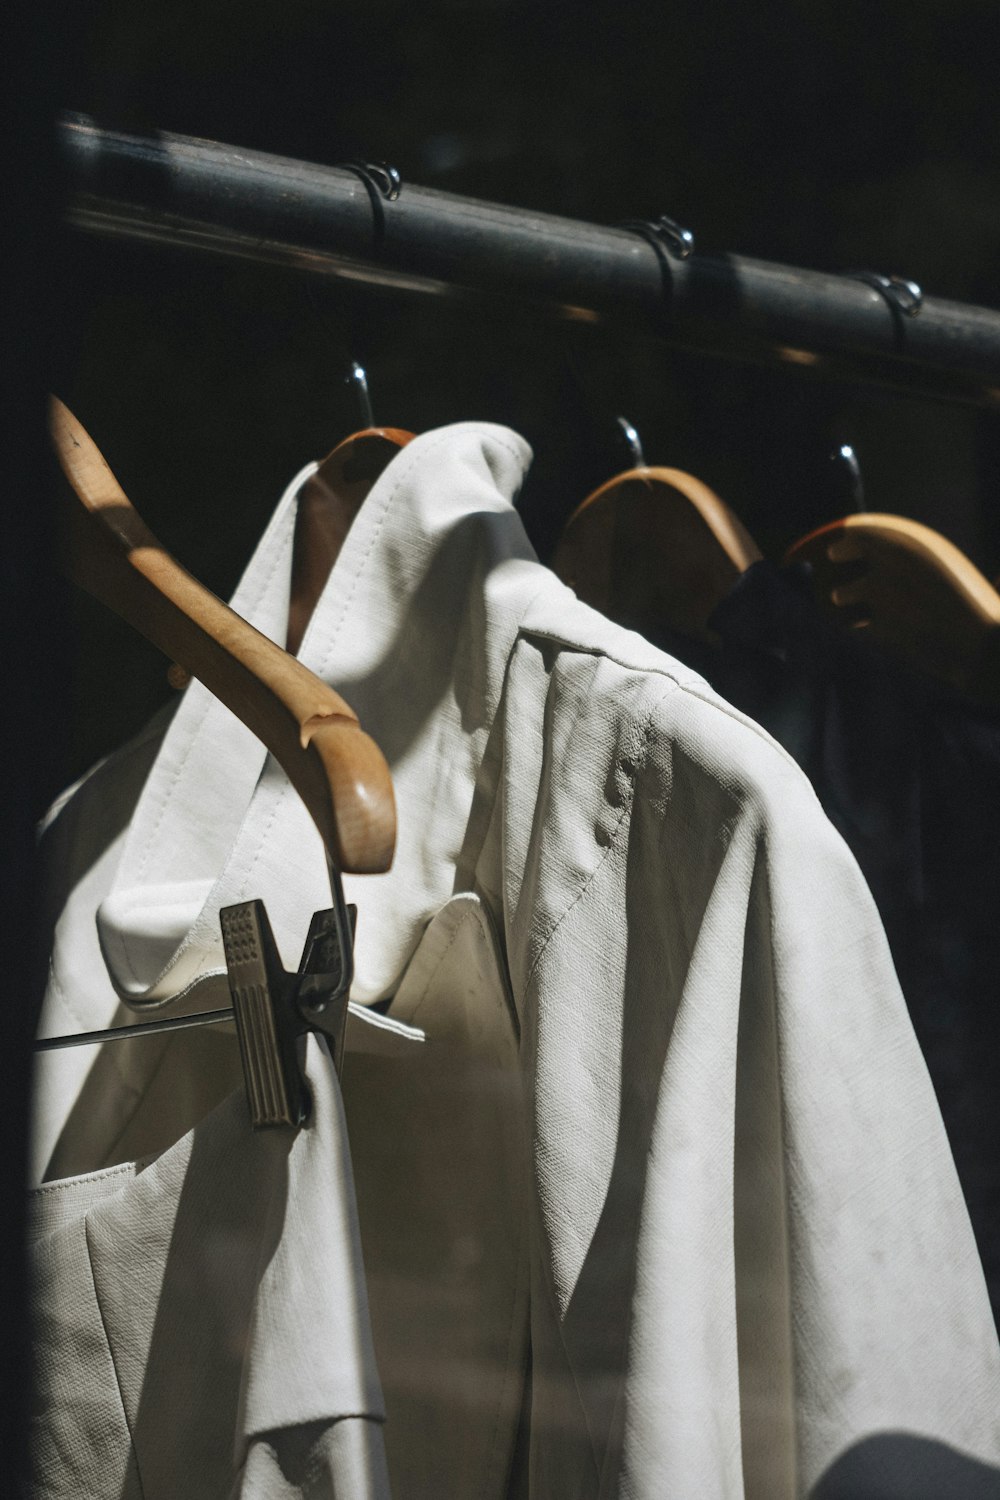 white dress shirt hanged on brown wooden clothes hanger